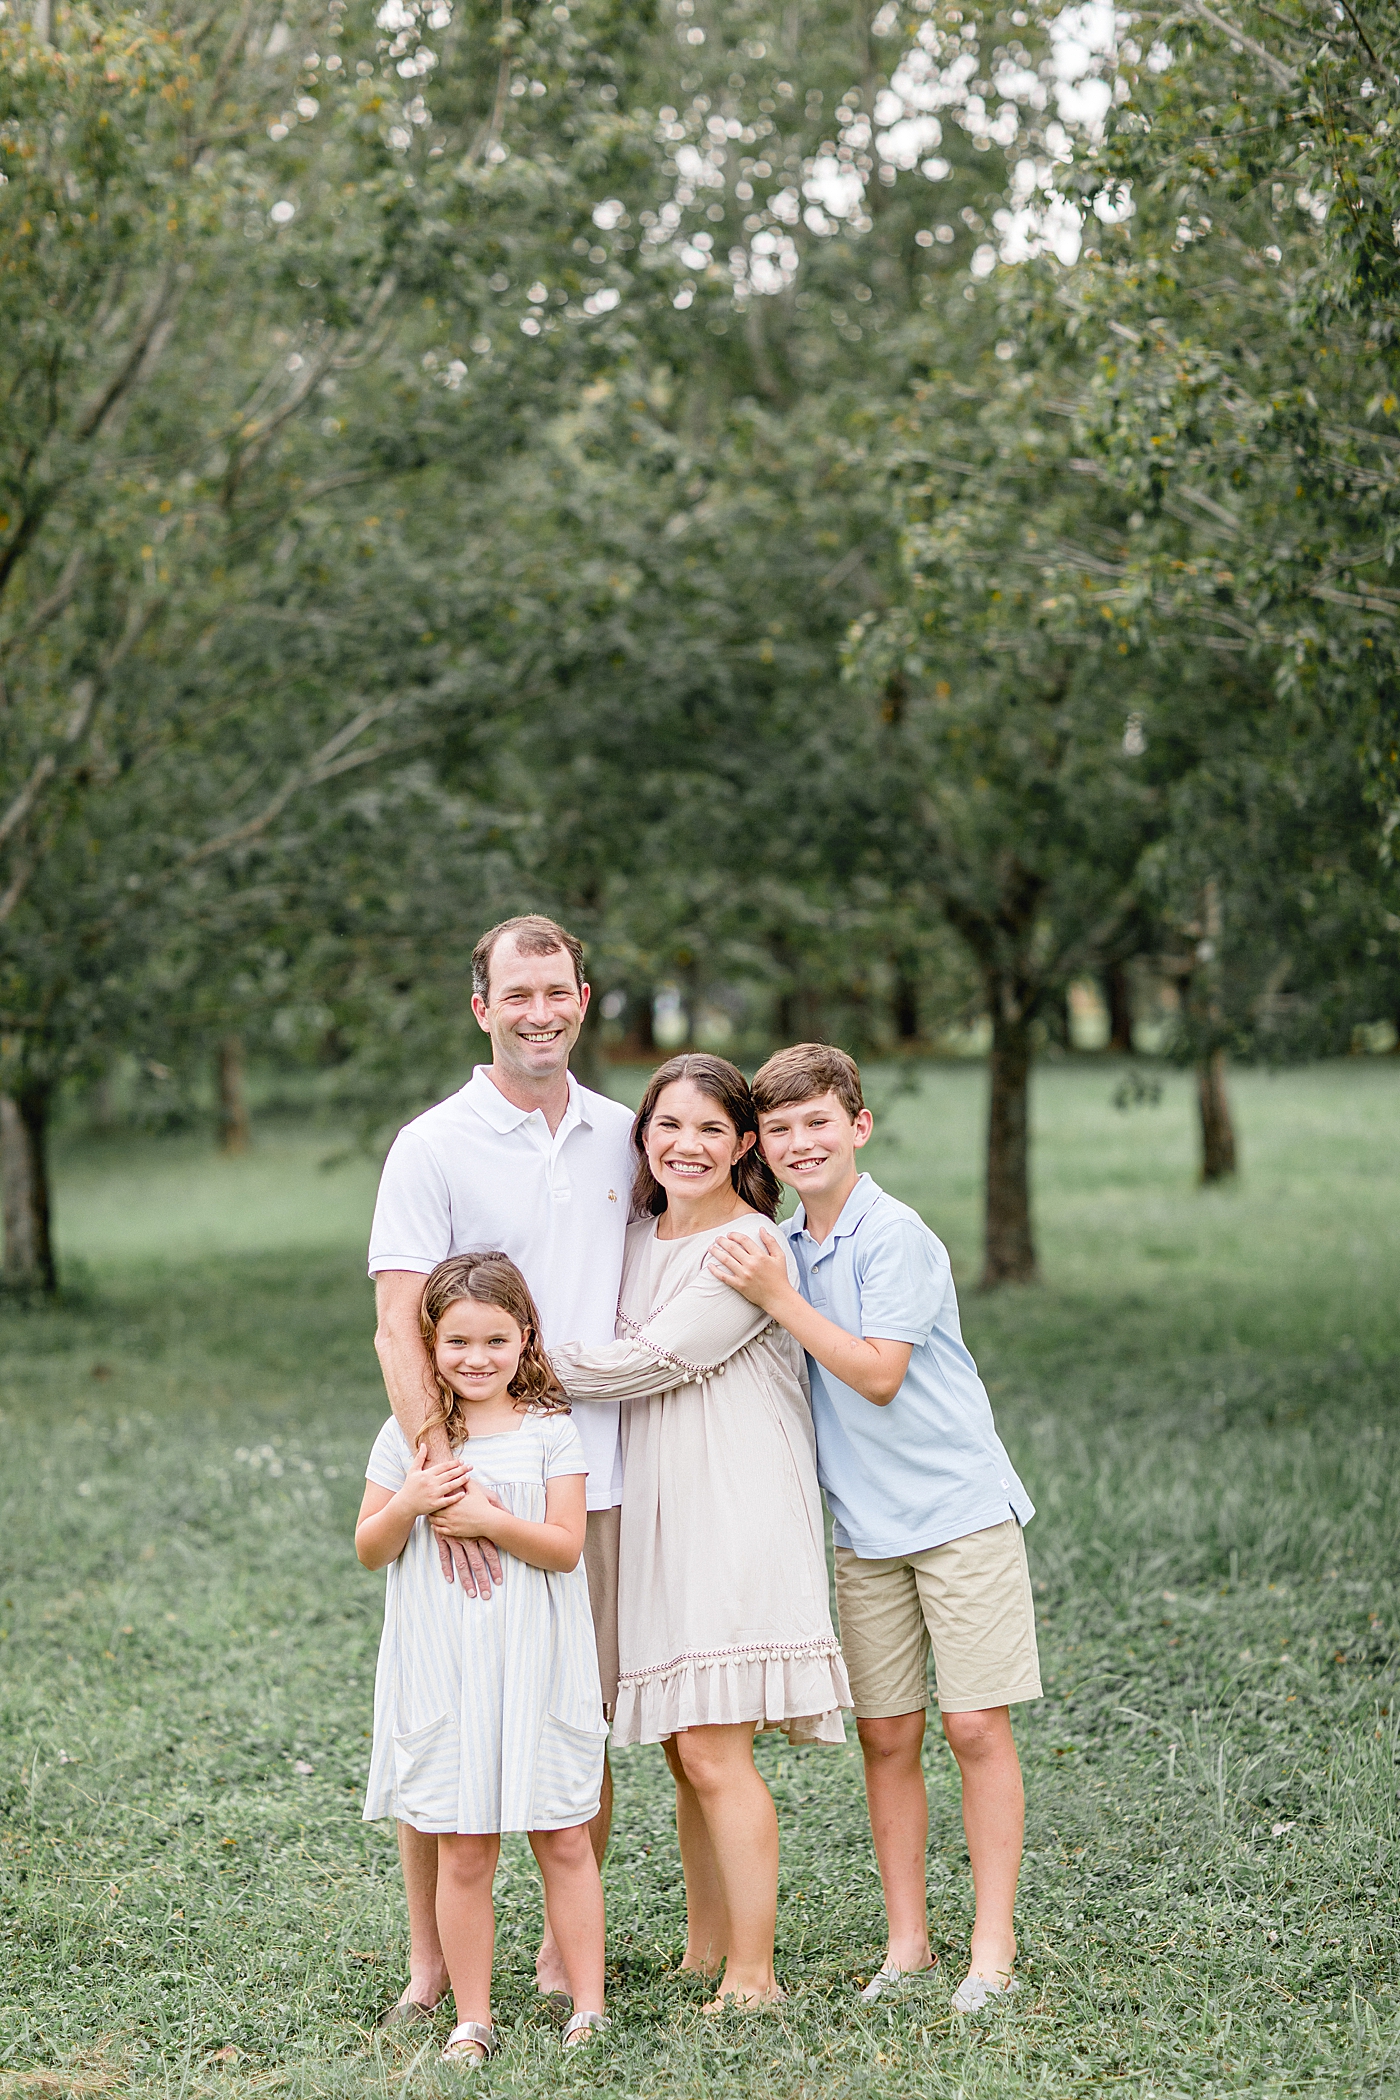 Outdoor family session in South Tampa. Photo by Brittany Elise Photography.